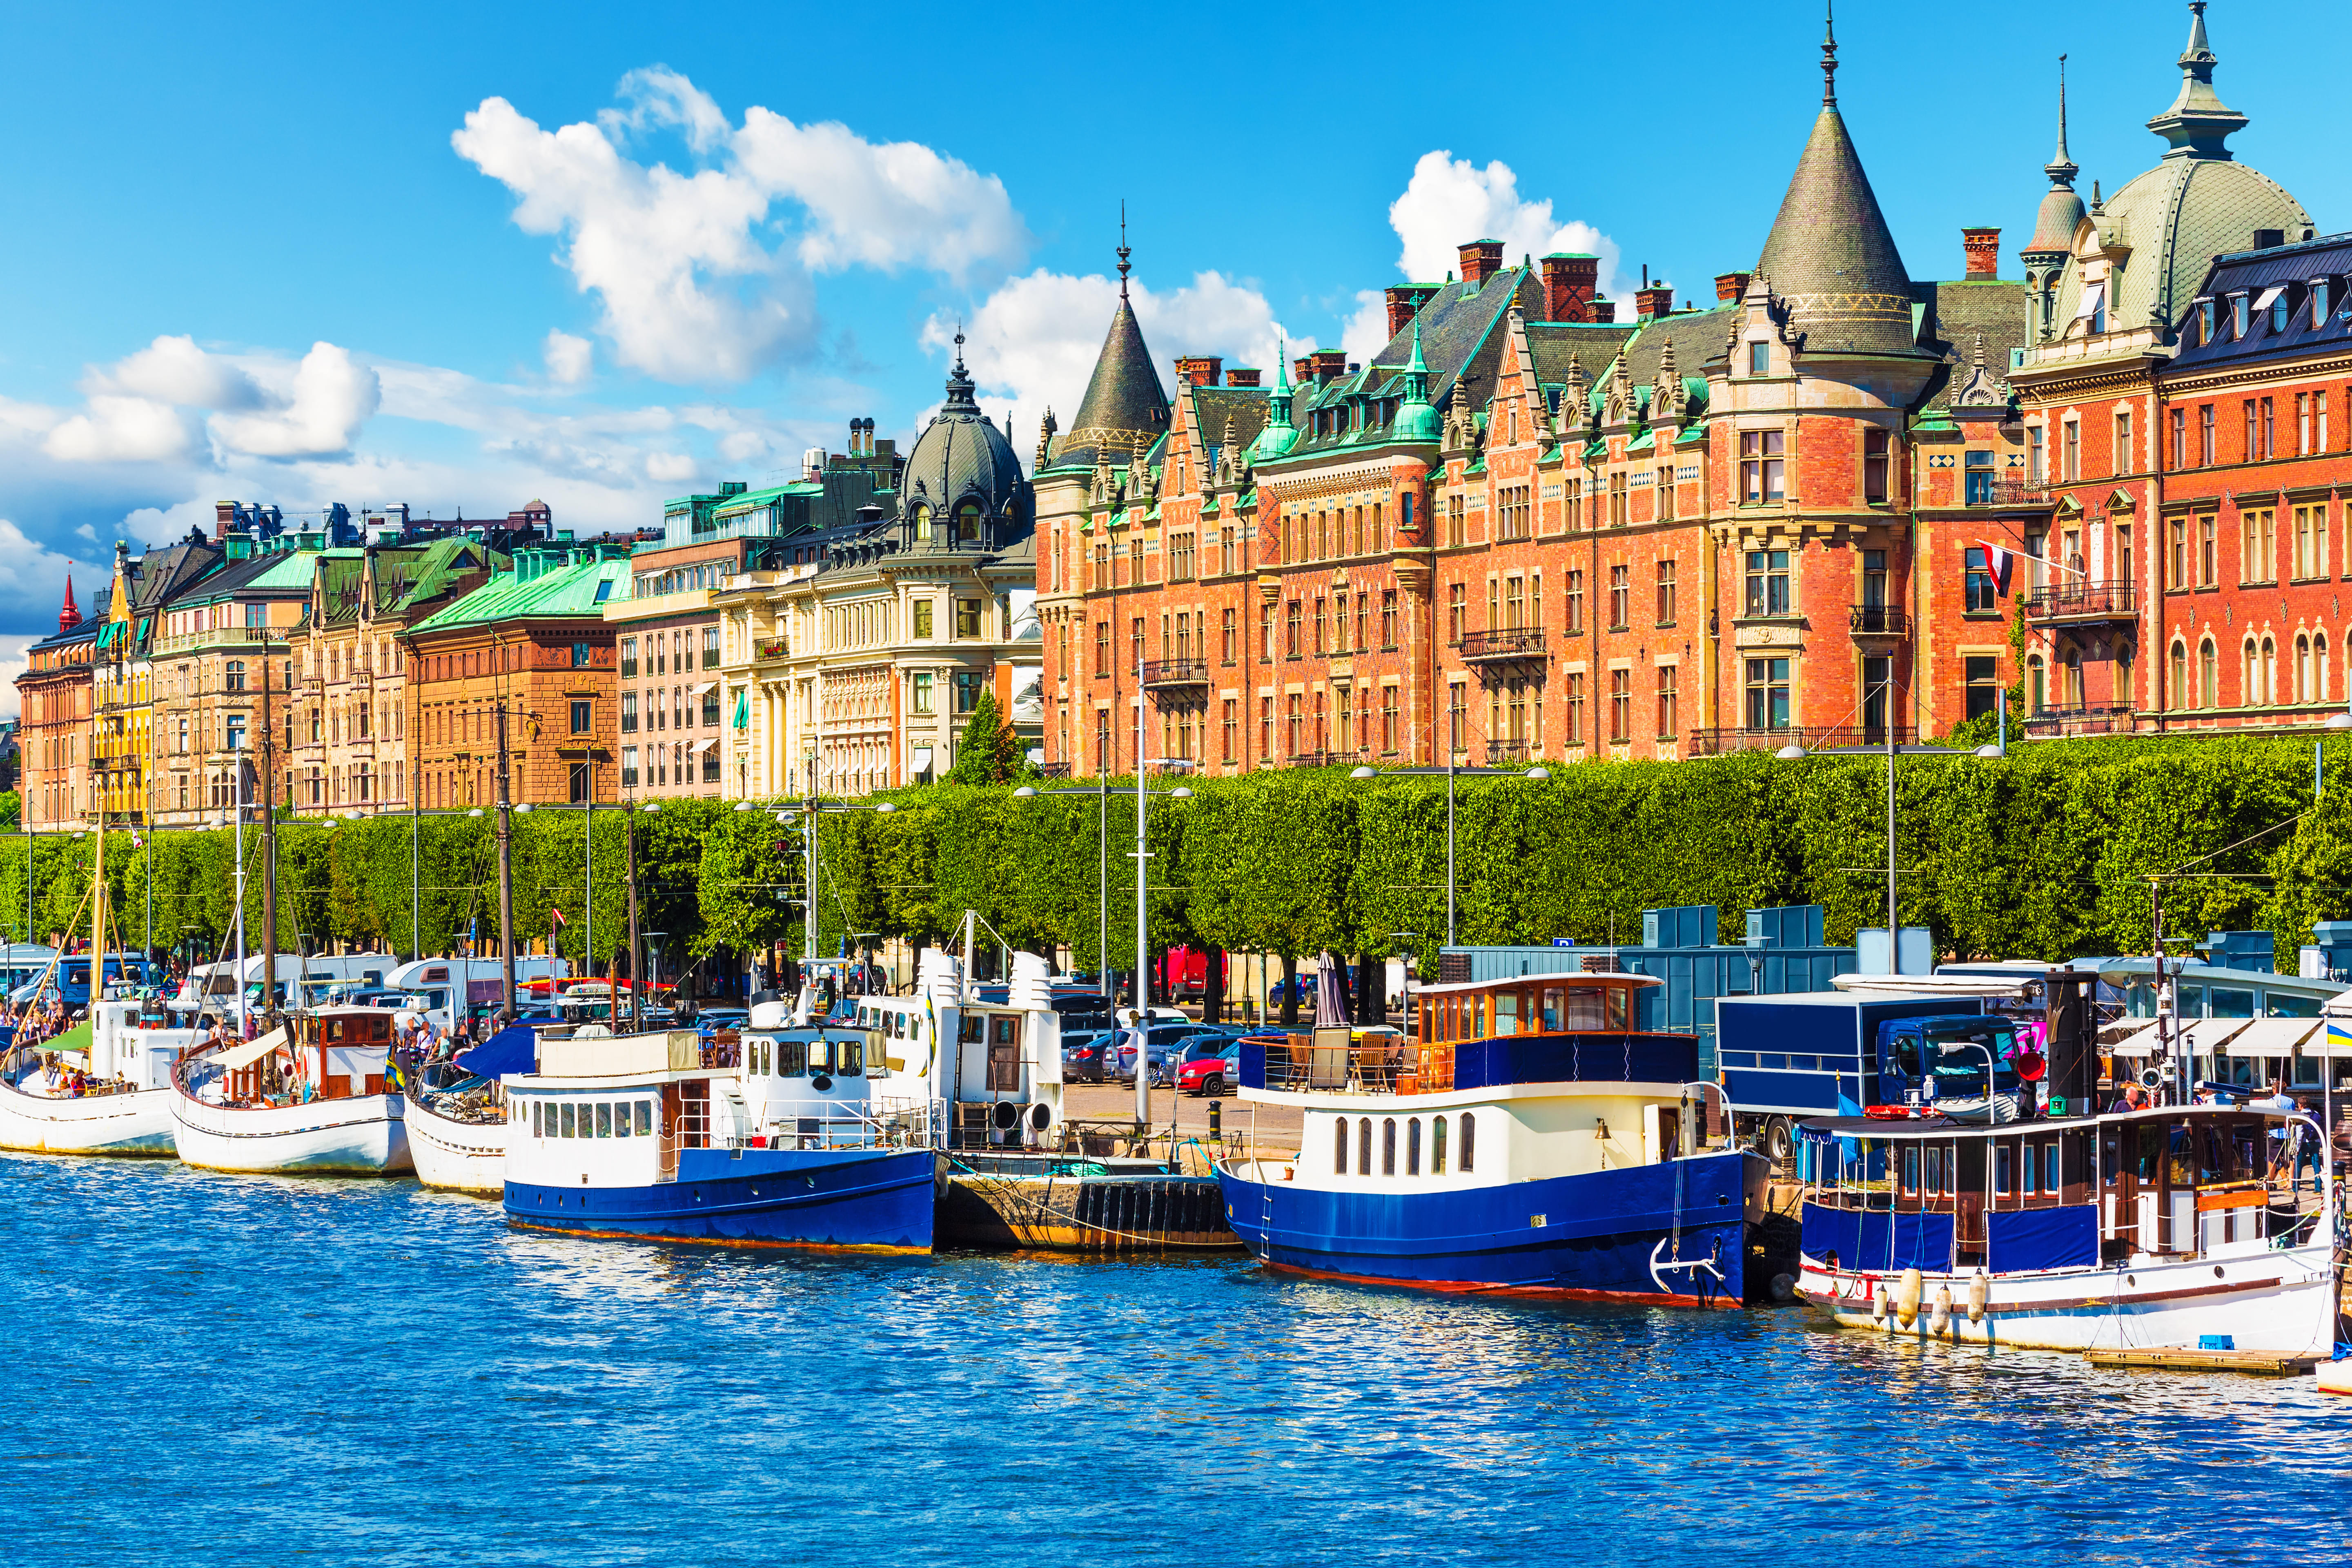 Things to Do in Stockholm